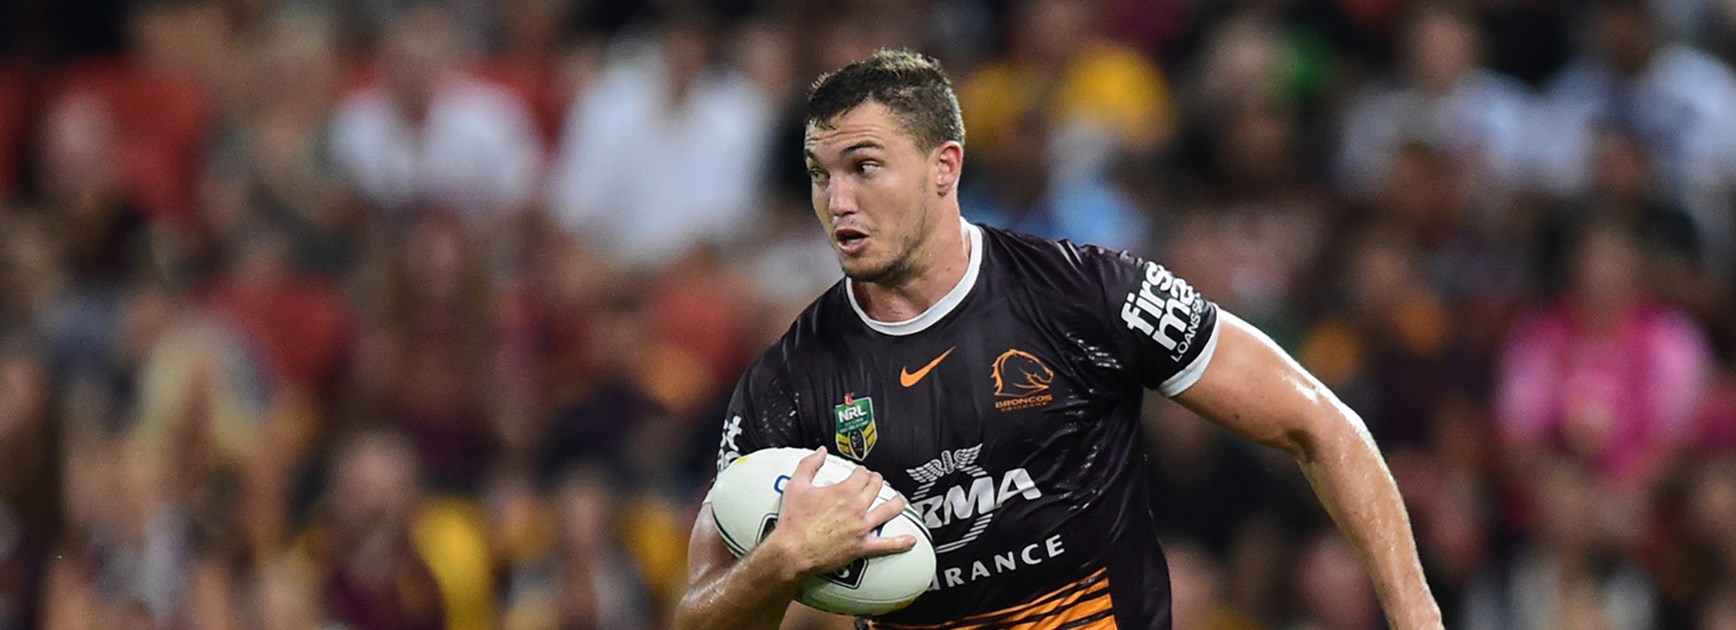 Broncos winger Corey Oates was impressive again in his side's win over the Warriors in Round 2.